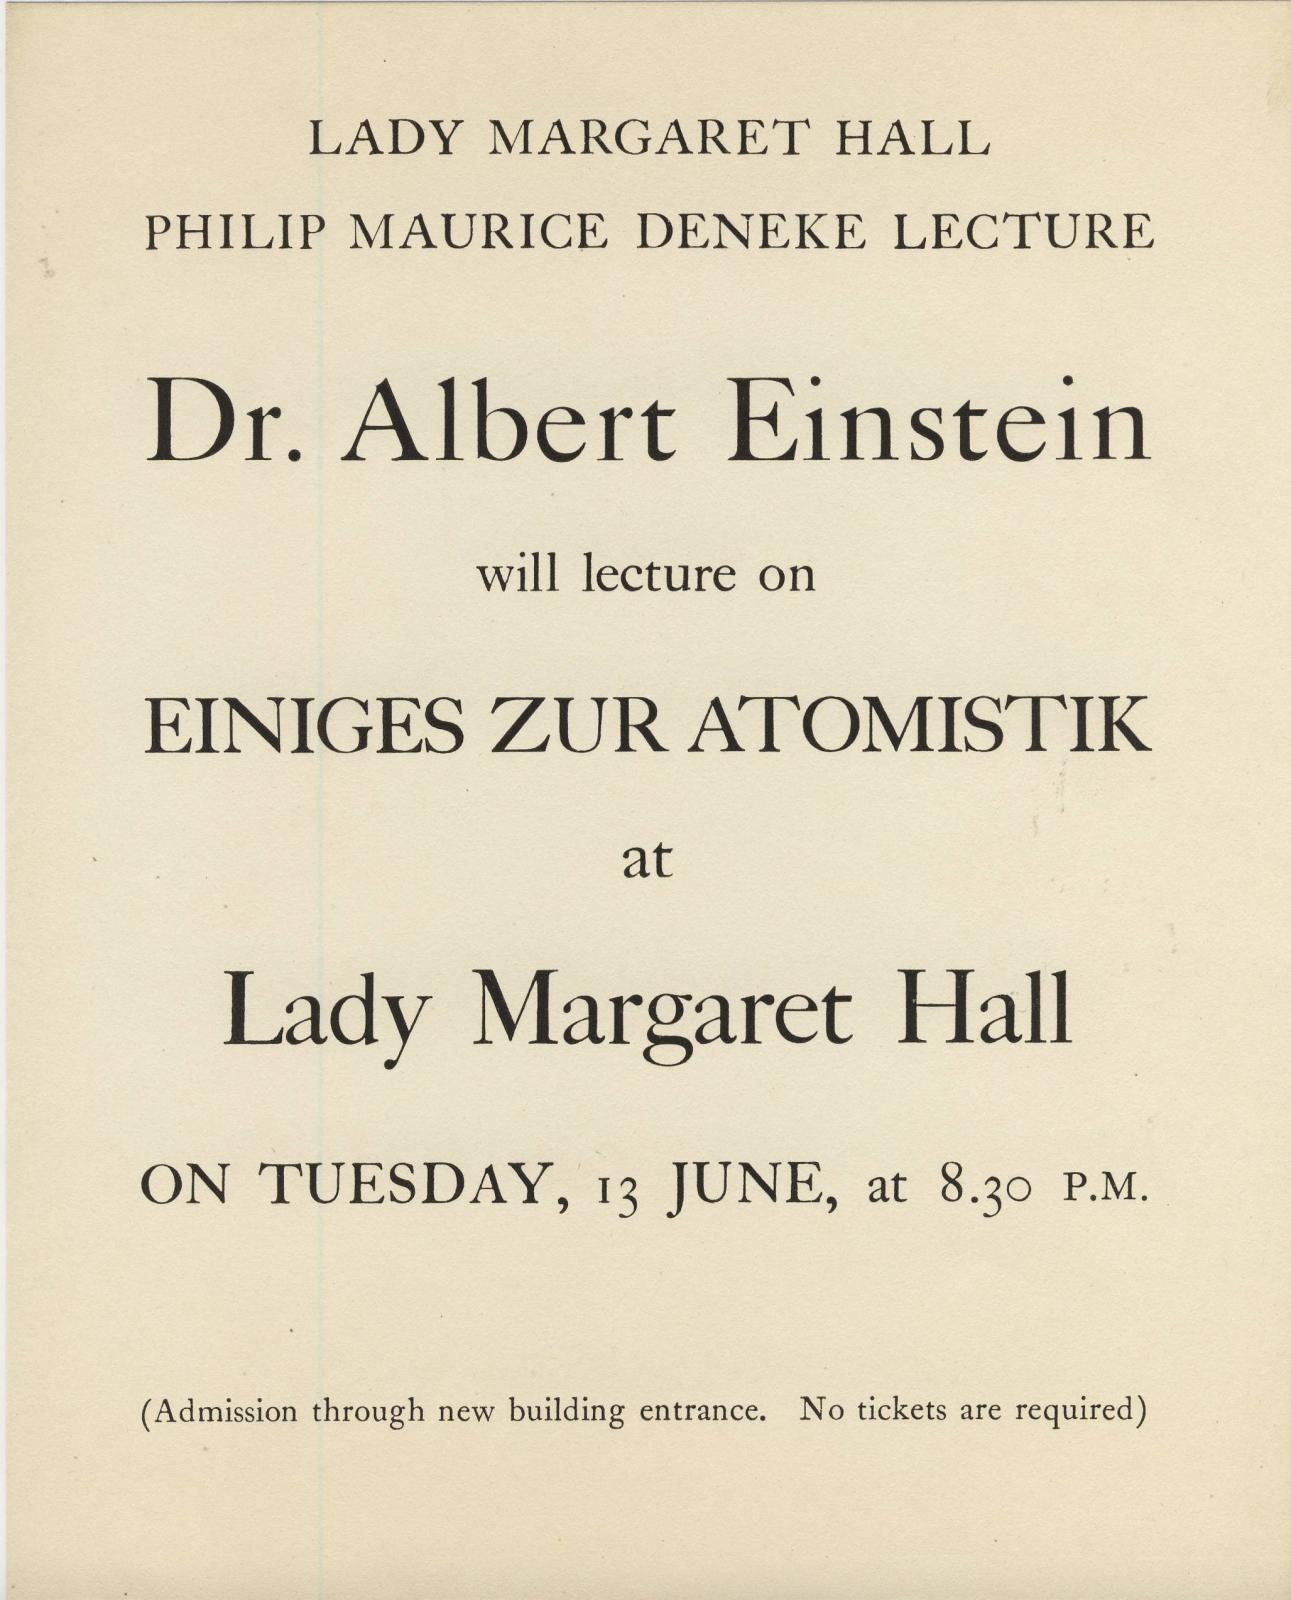 The 1933 Deneke Lecture had a particularly memorable and magnetic speaker.